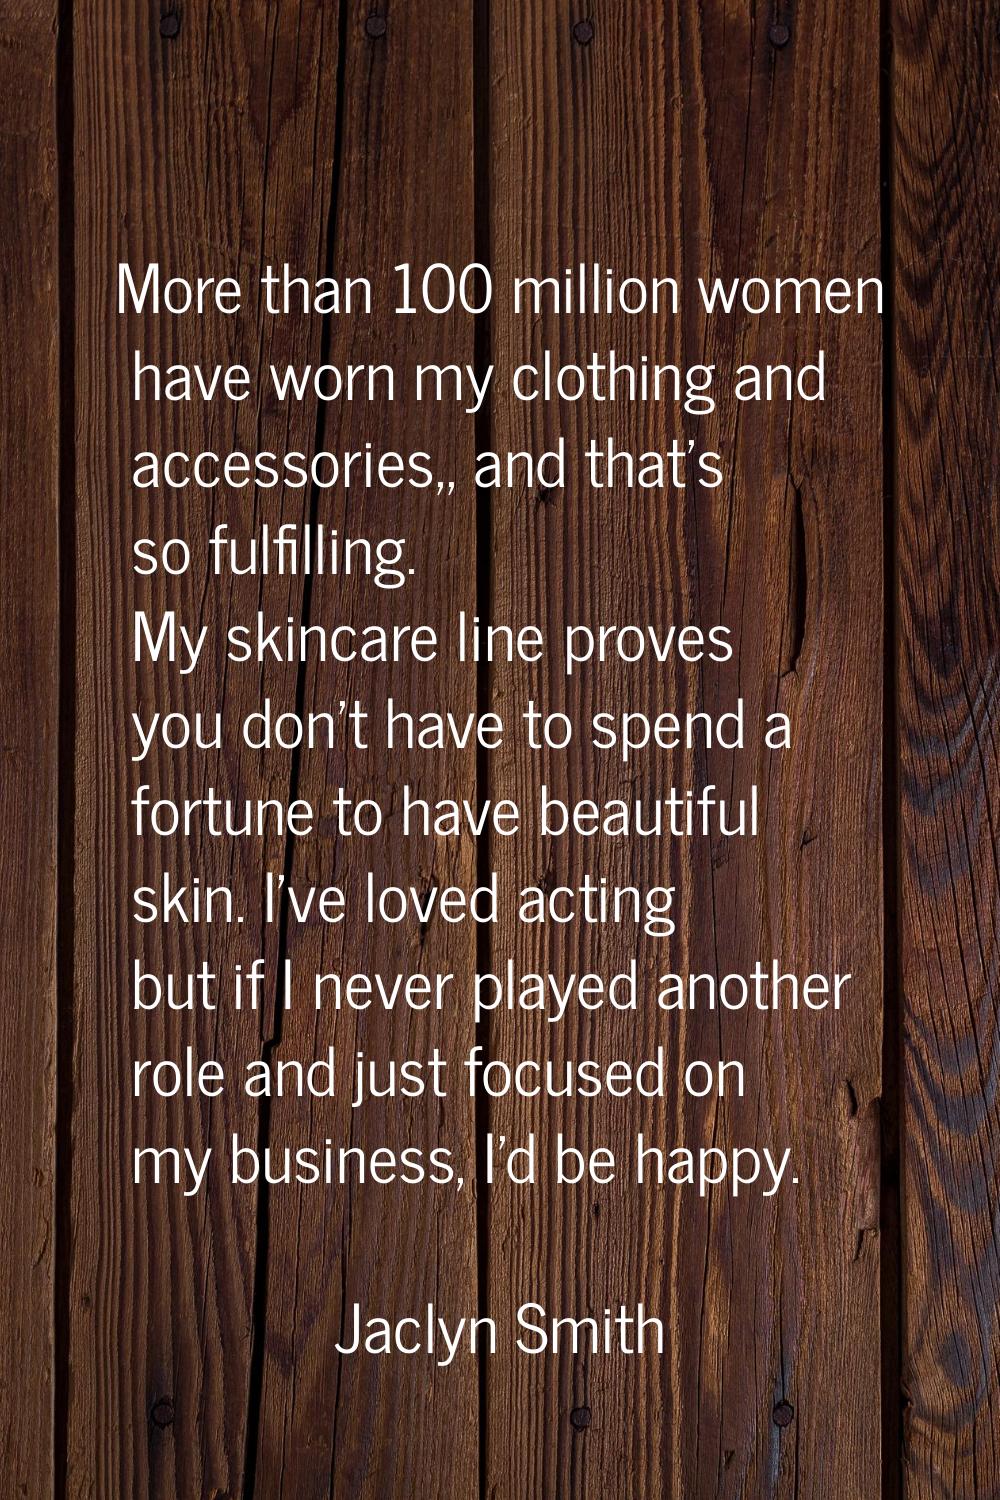 More than 100 million women have worn my clothing and accessories,, and that's so fulfilling. My sk